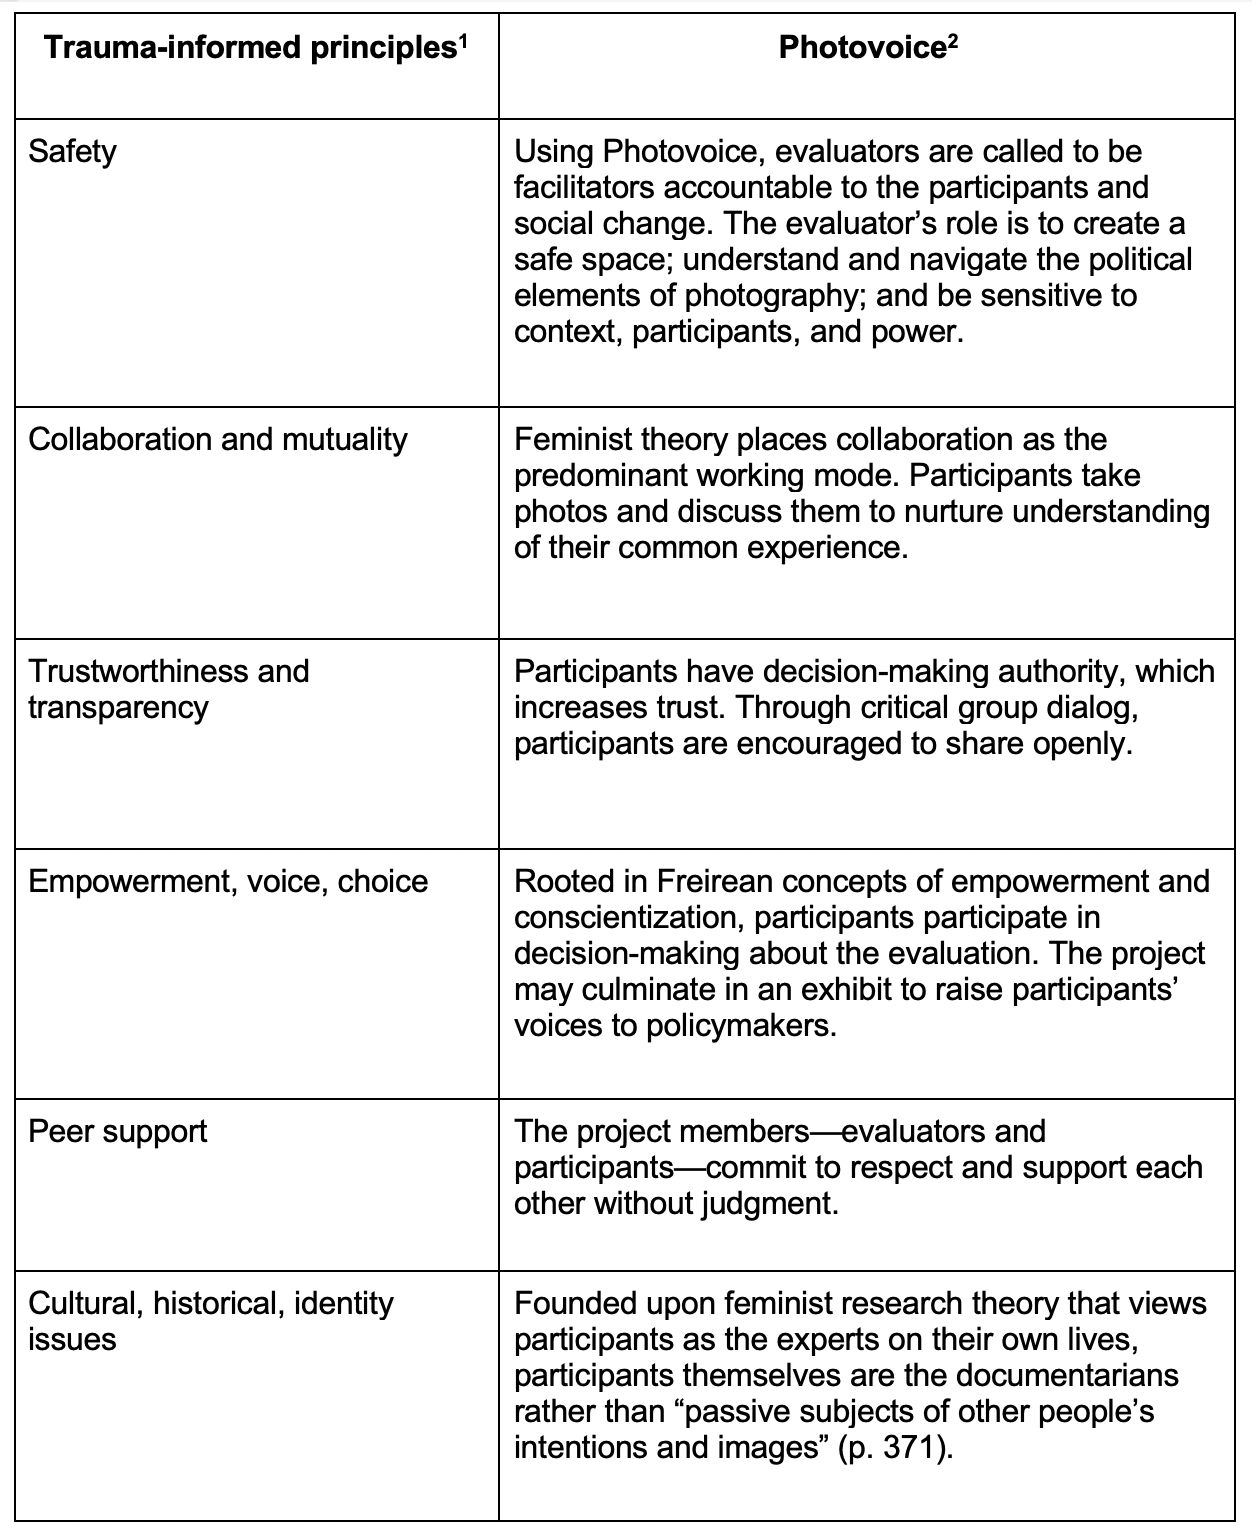 Table of Trauma informed principles and Photovoice.